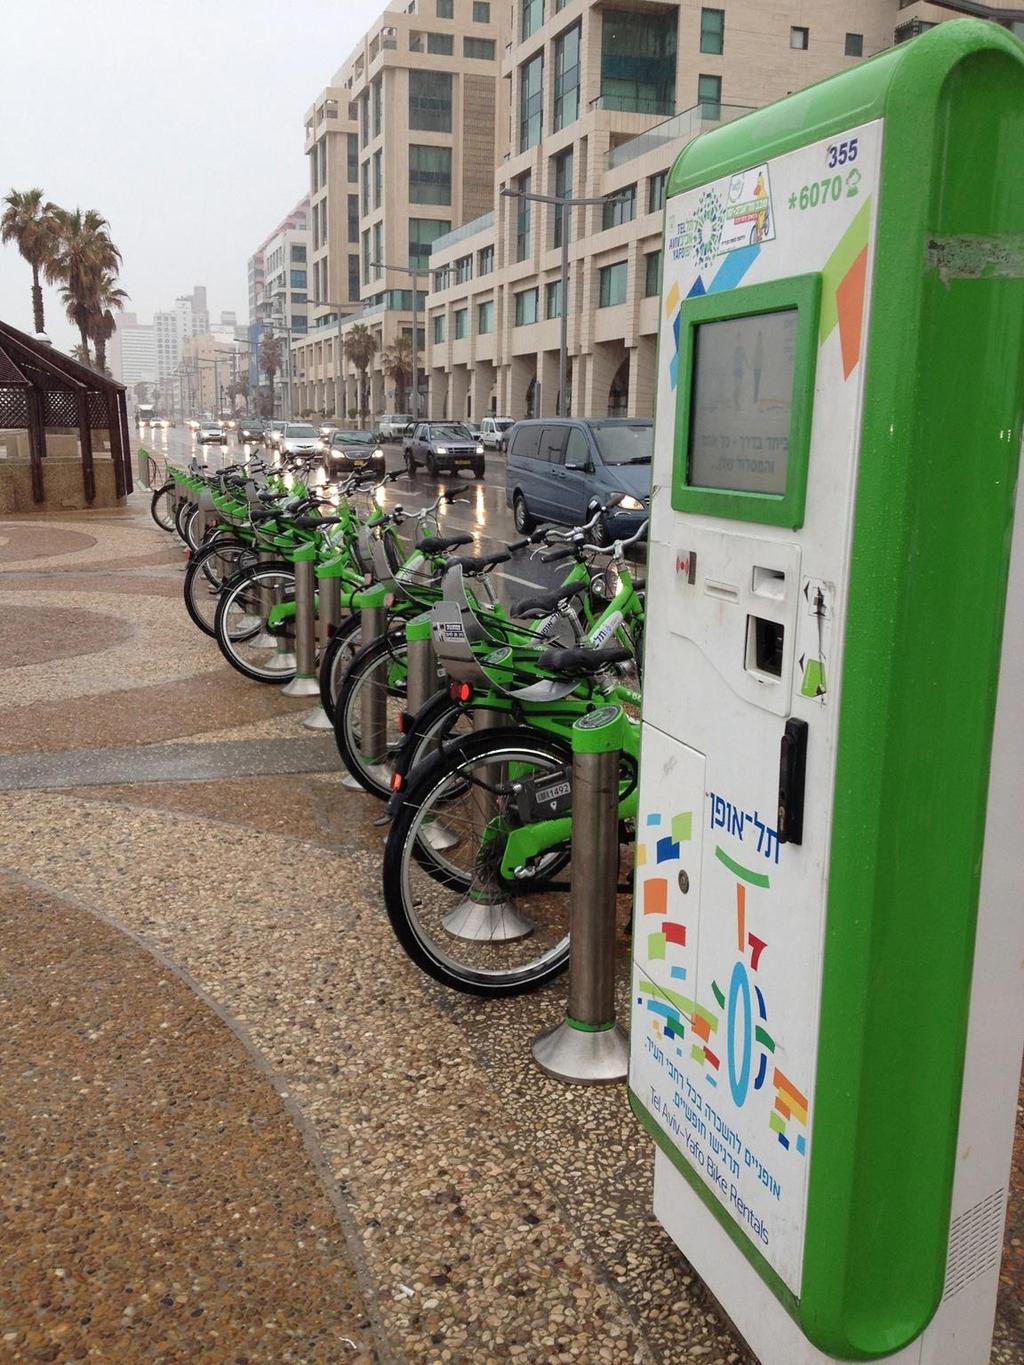 Bike rental parks like these are increasingly popular worldwide Pay upfront X amount of hours you